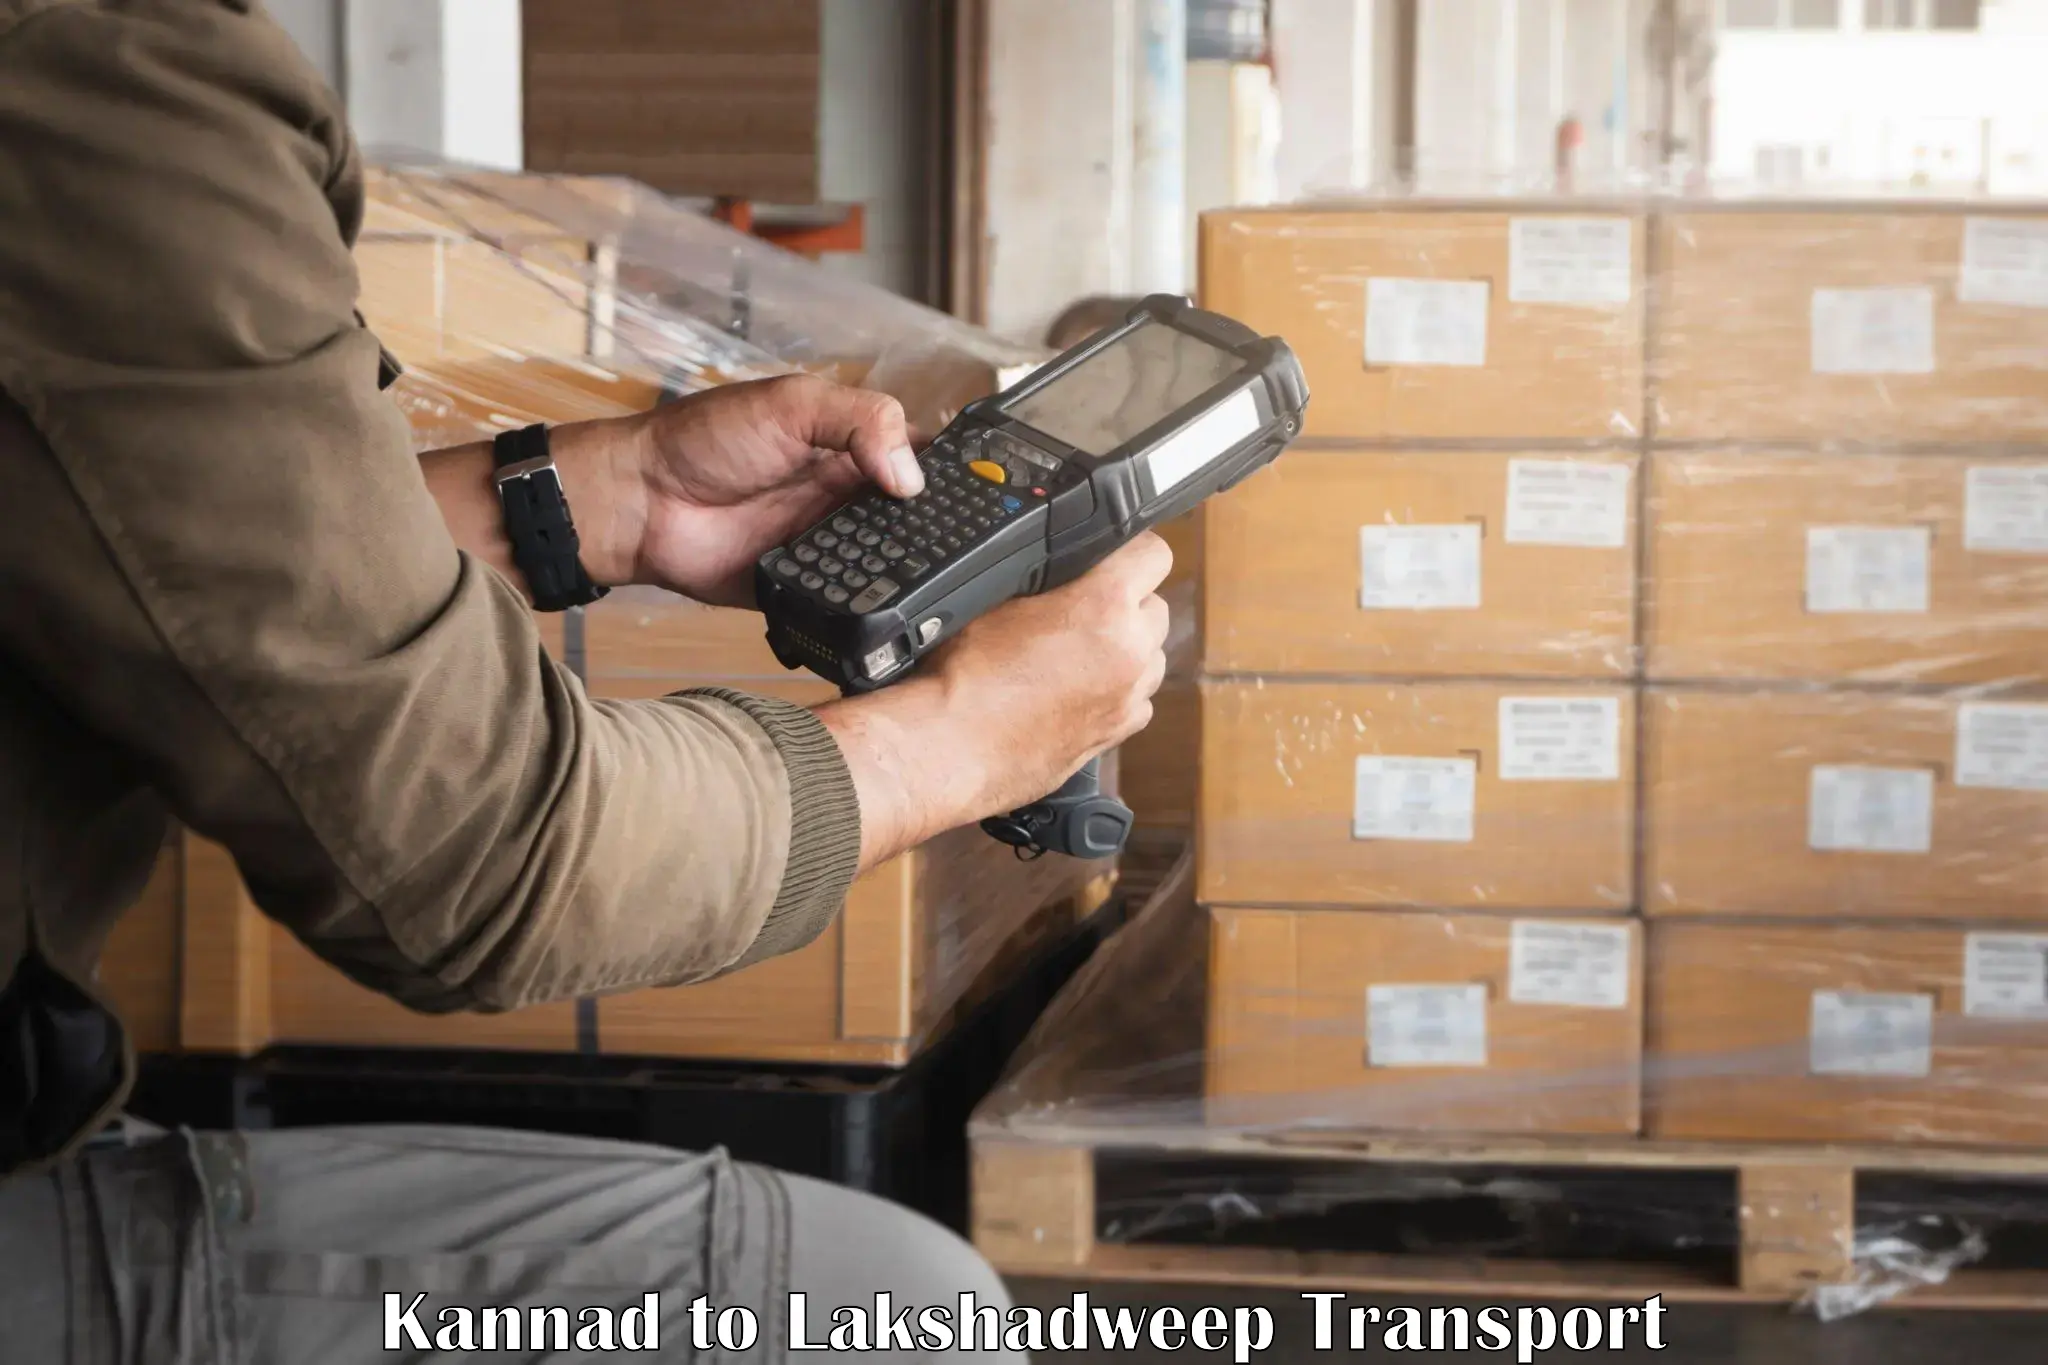 Air cargo transport services in Kannad to Lakshadweep